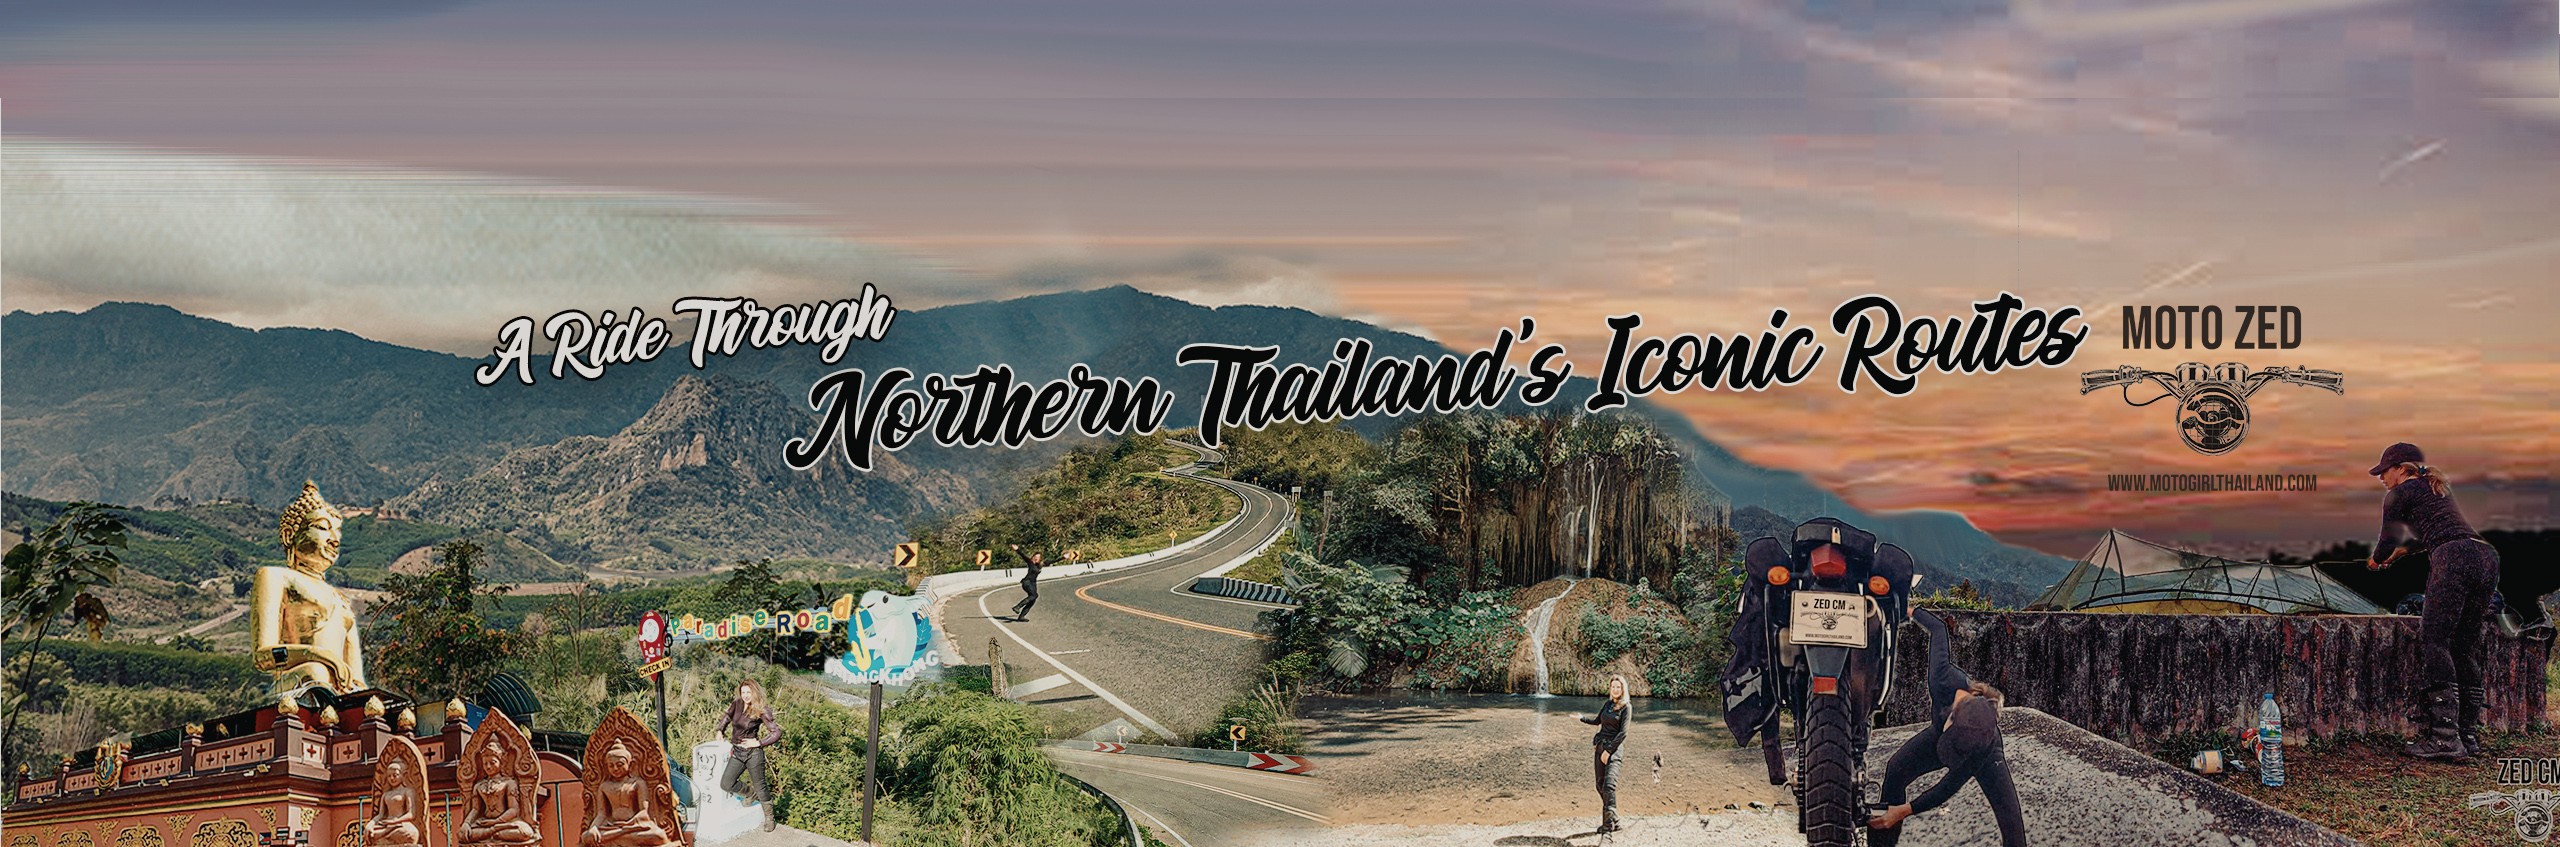 Iconic Roads of Northern Thailand